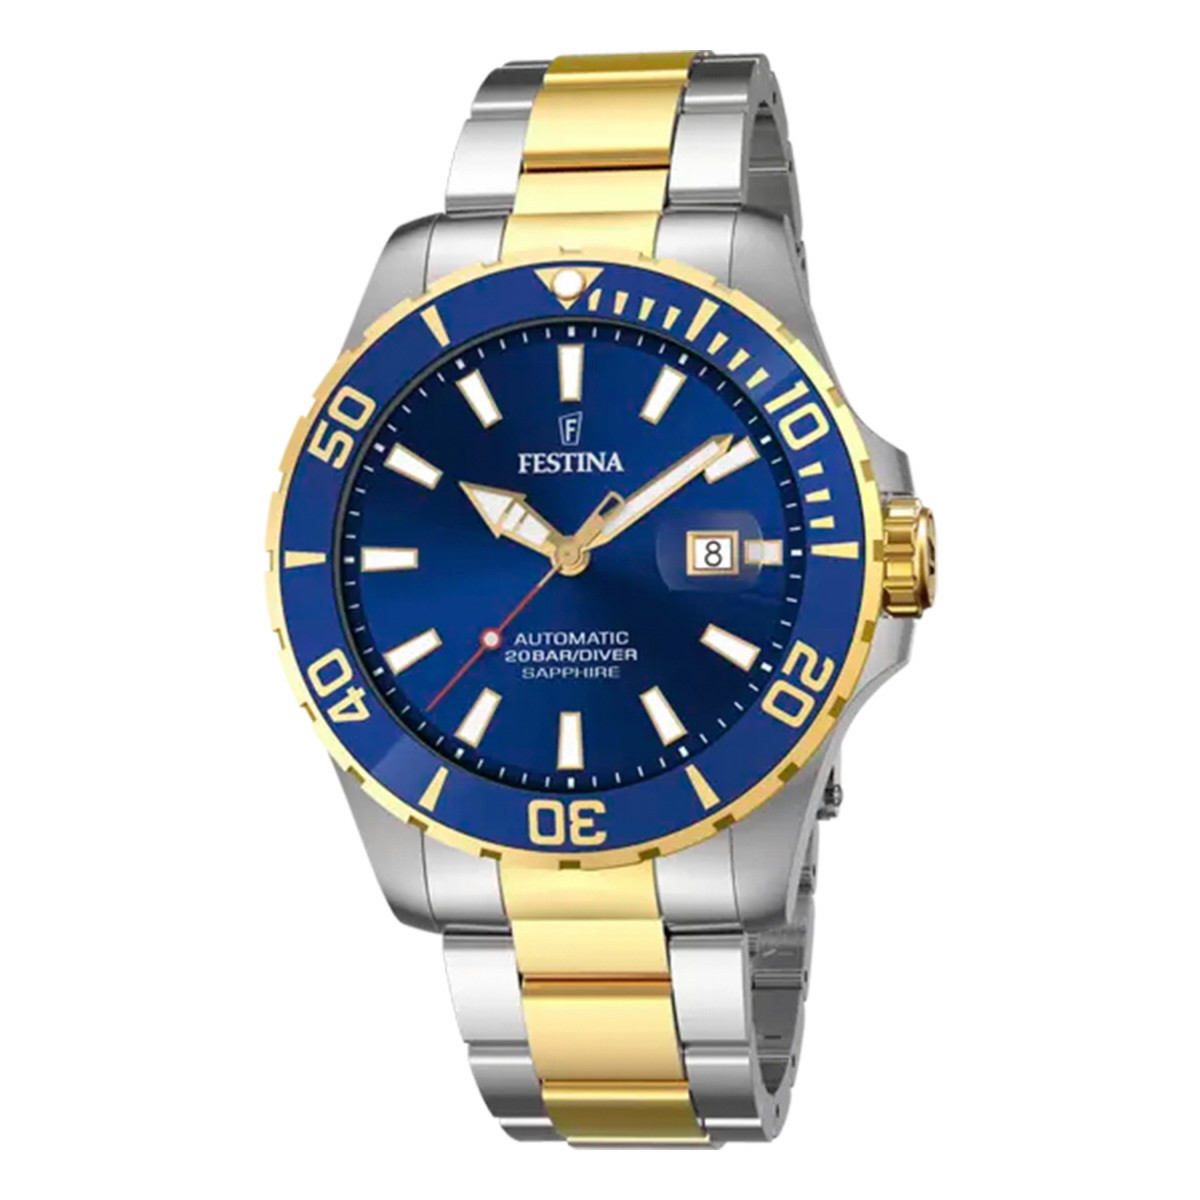 FESTINA AUTOMATIC MEN'S WATCH WITH BLUE DIAL